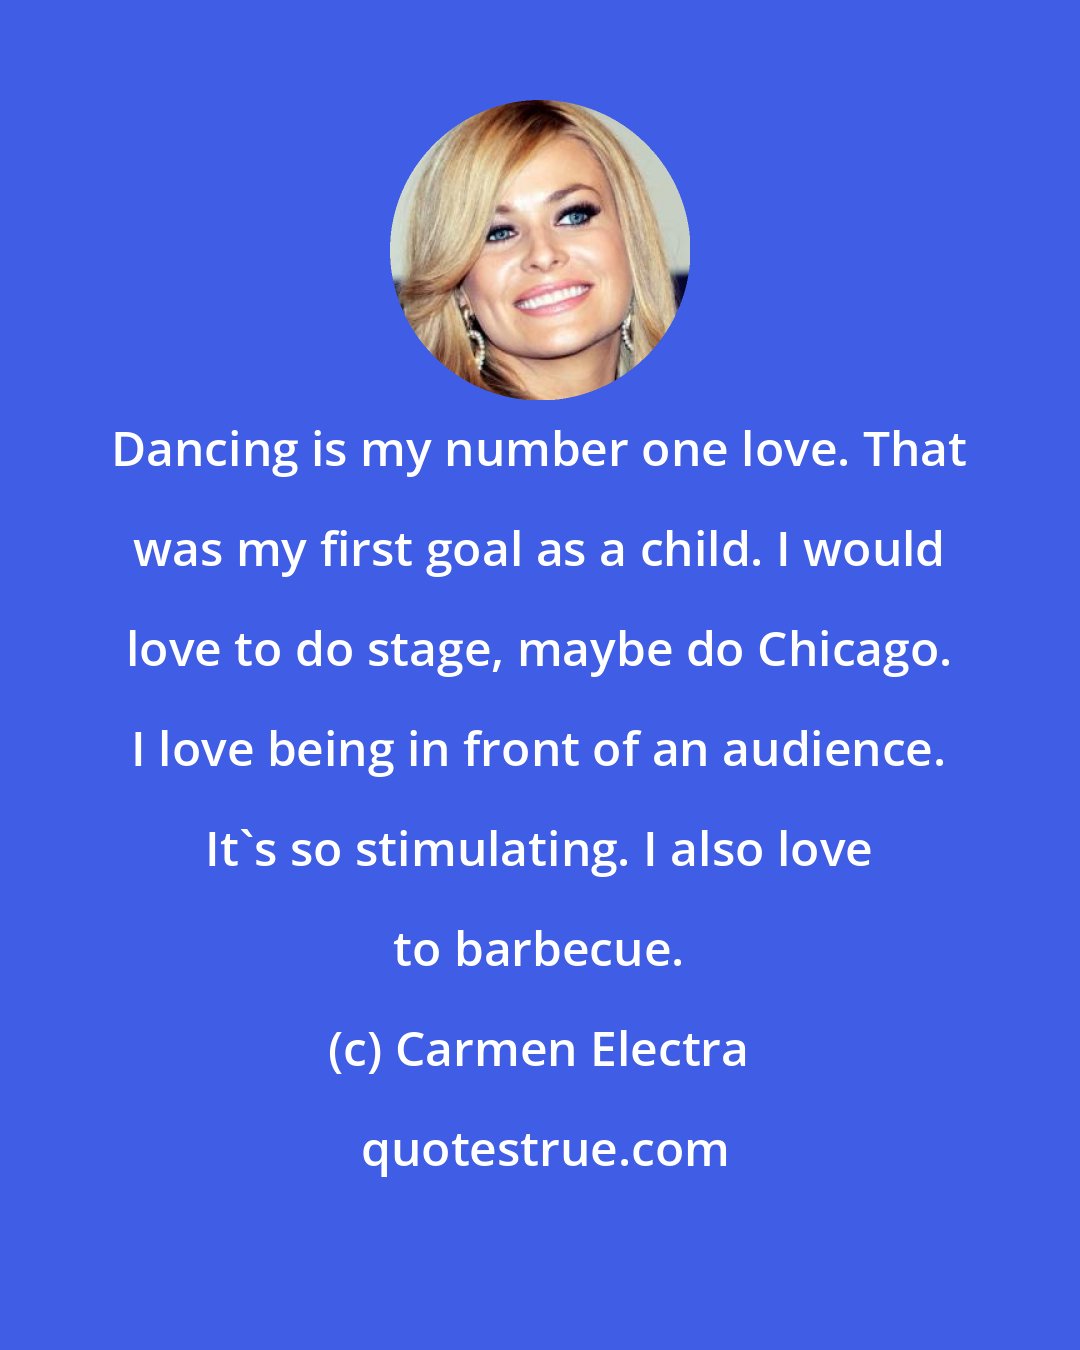 Carmen Electra: Dancing is my number one love. That was my first goal as a child. I would love to do stage, maybe do Chicago. I love being in front of an audience. It's so stimulating. I also love to barbecue.